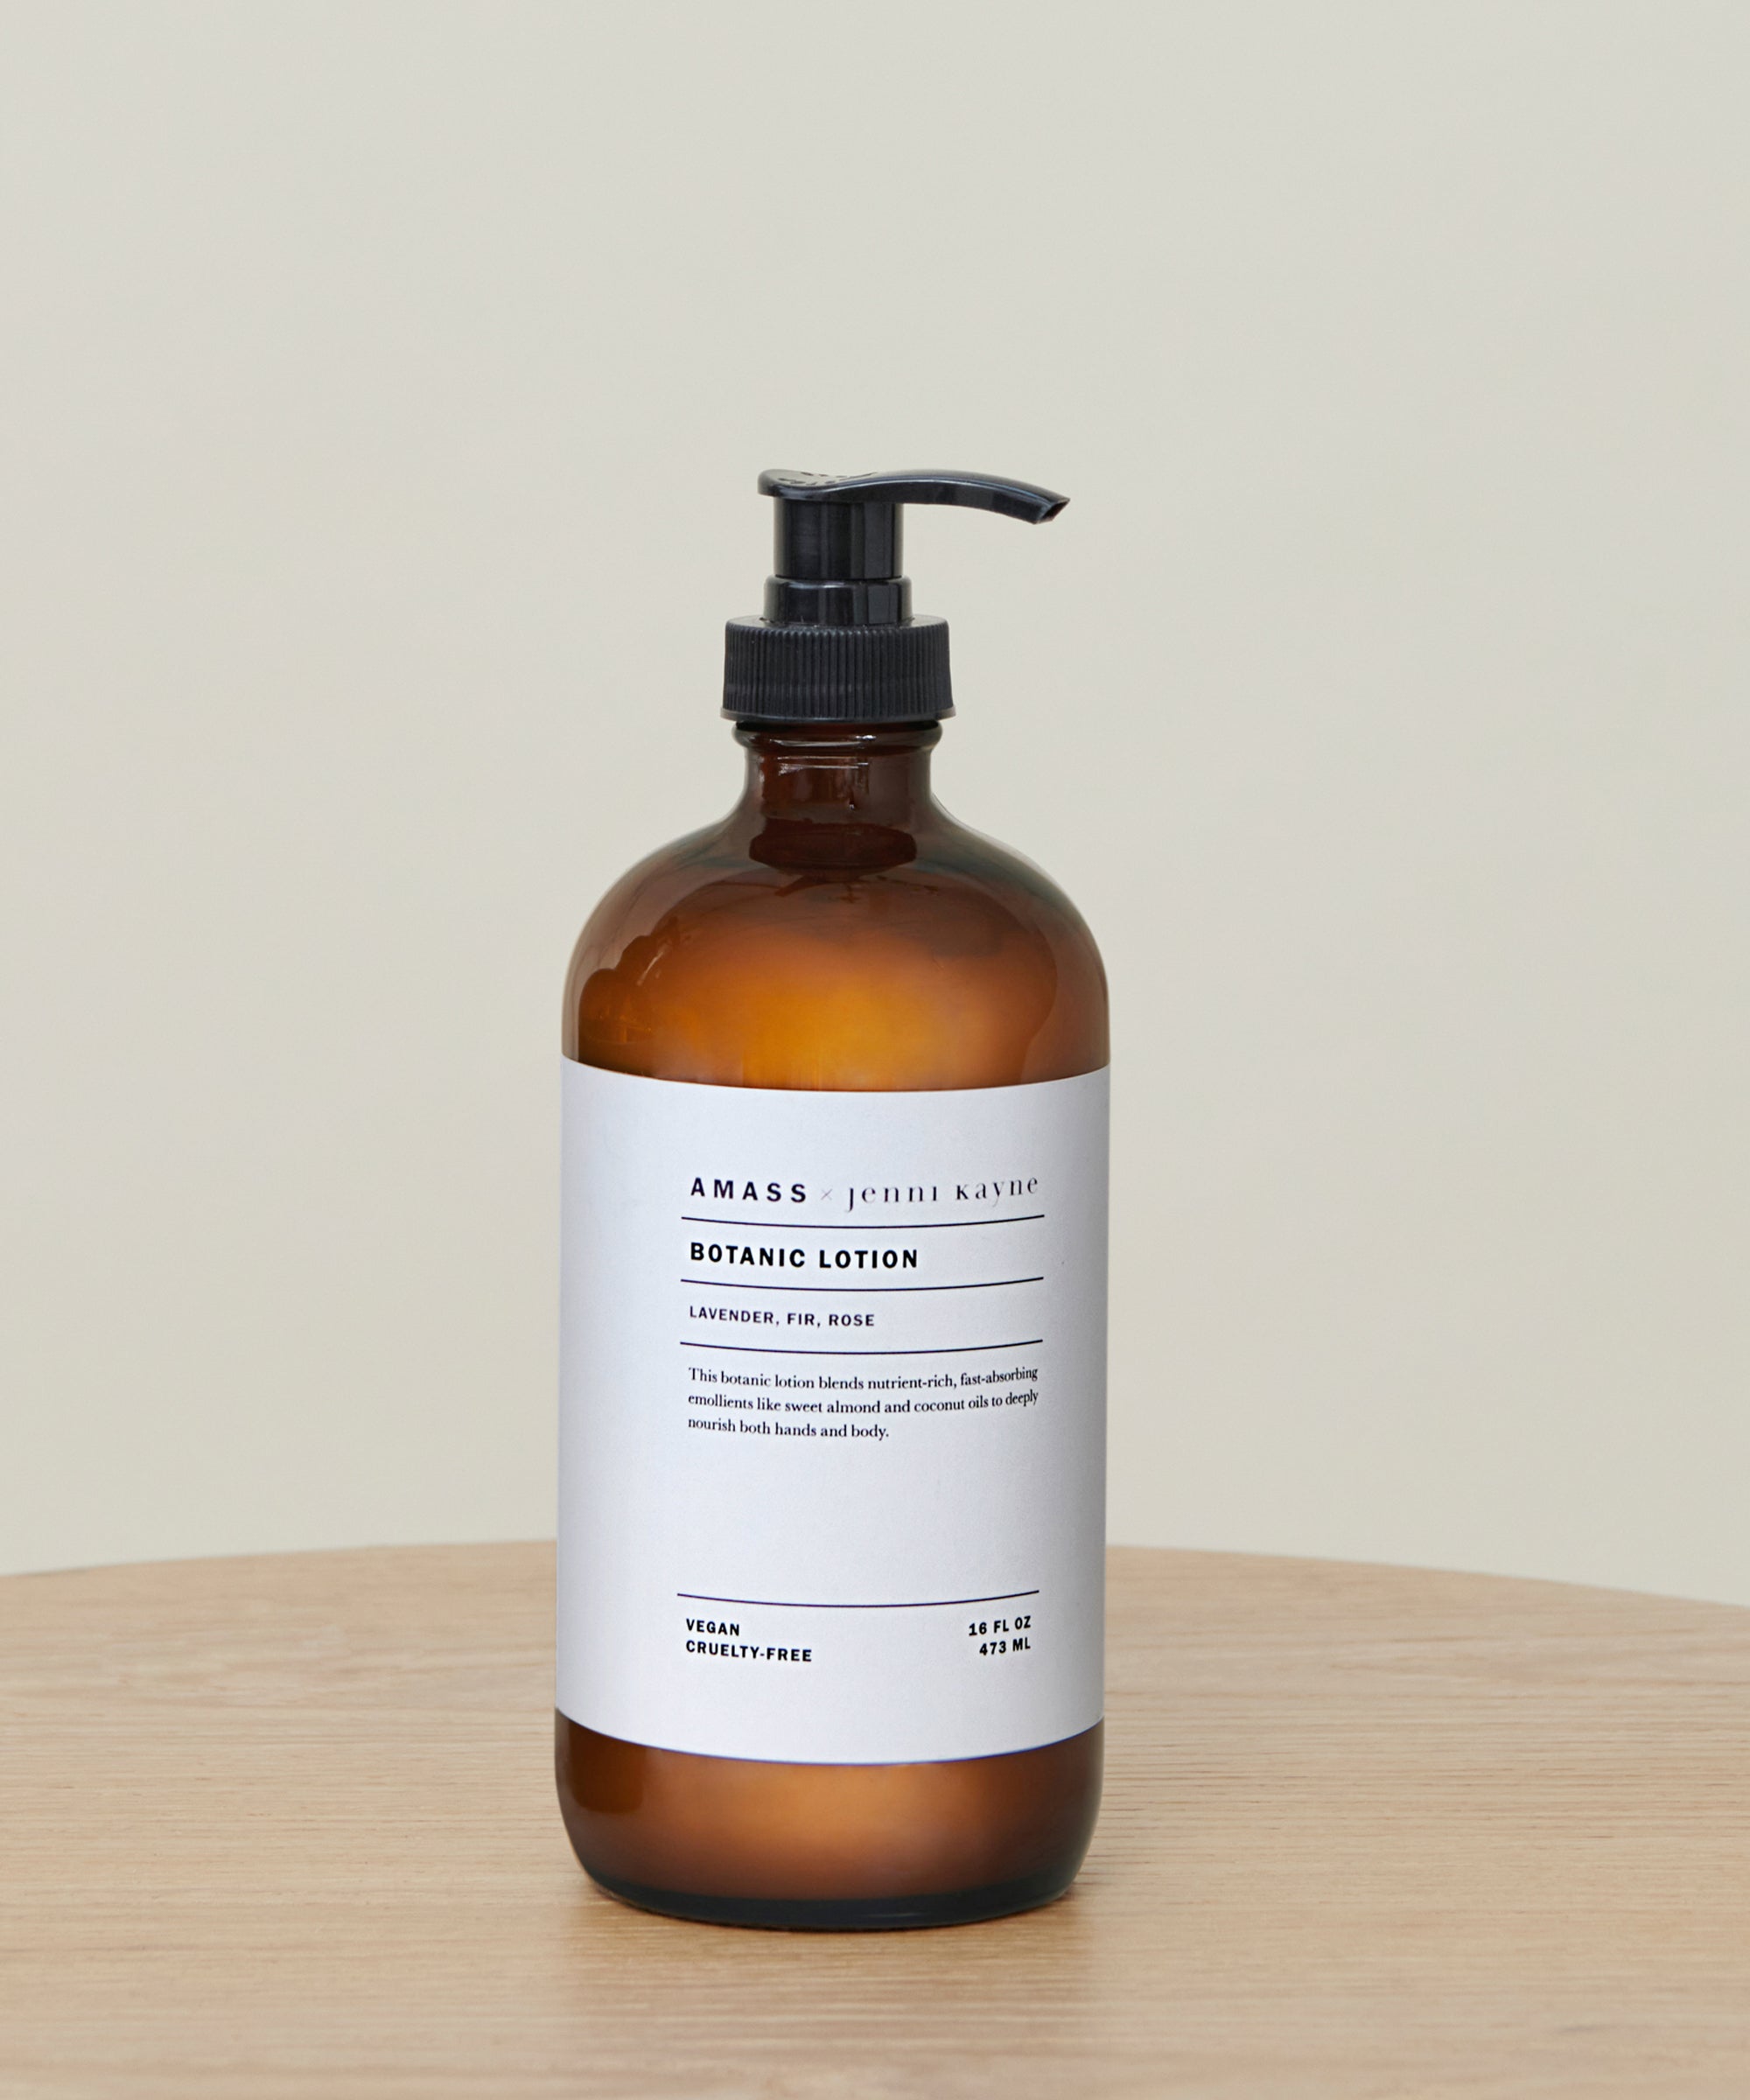 https://cdn.shopify.com/s/files/1/0565/1234/8333/products/amass-apothecary-hand-lotion-1.jpg?v=1646066511